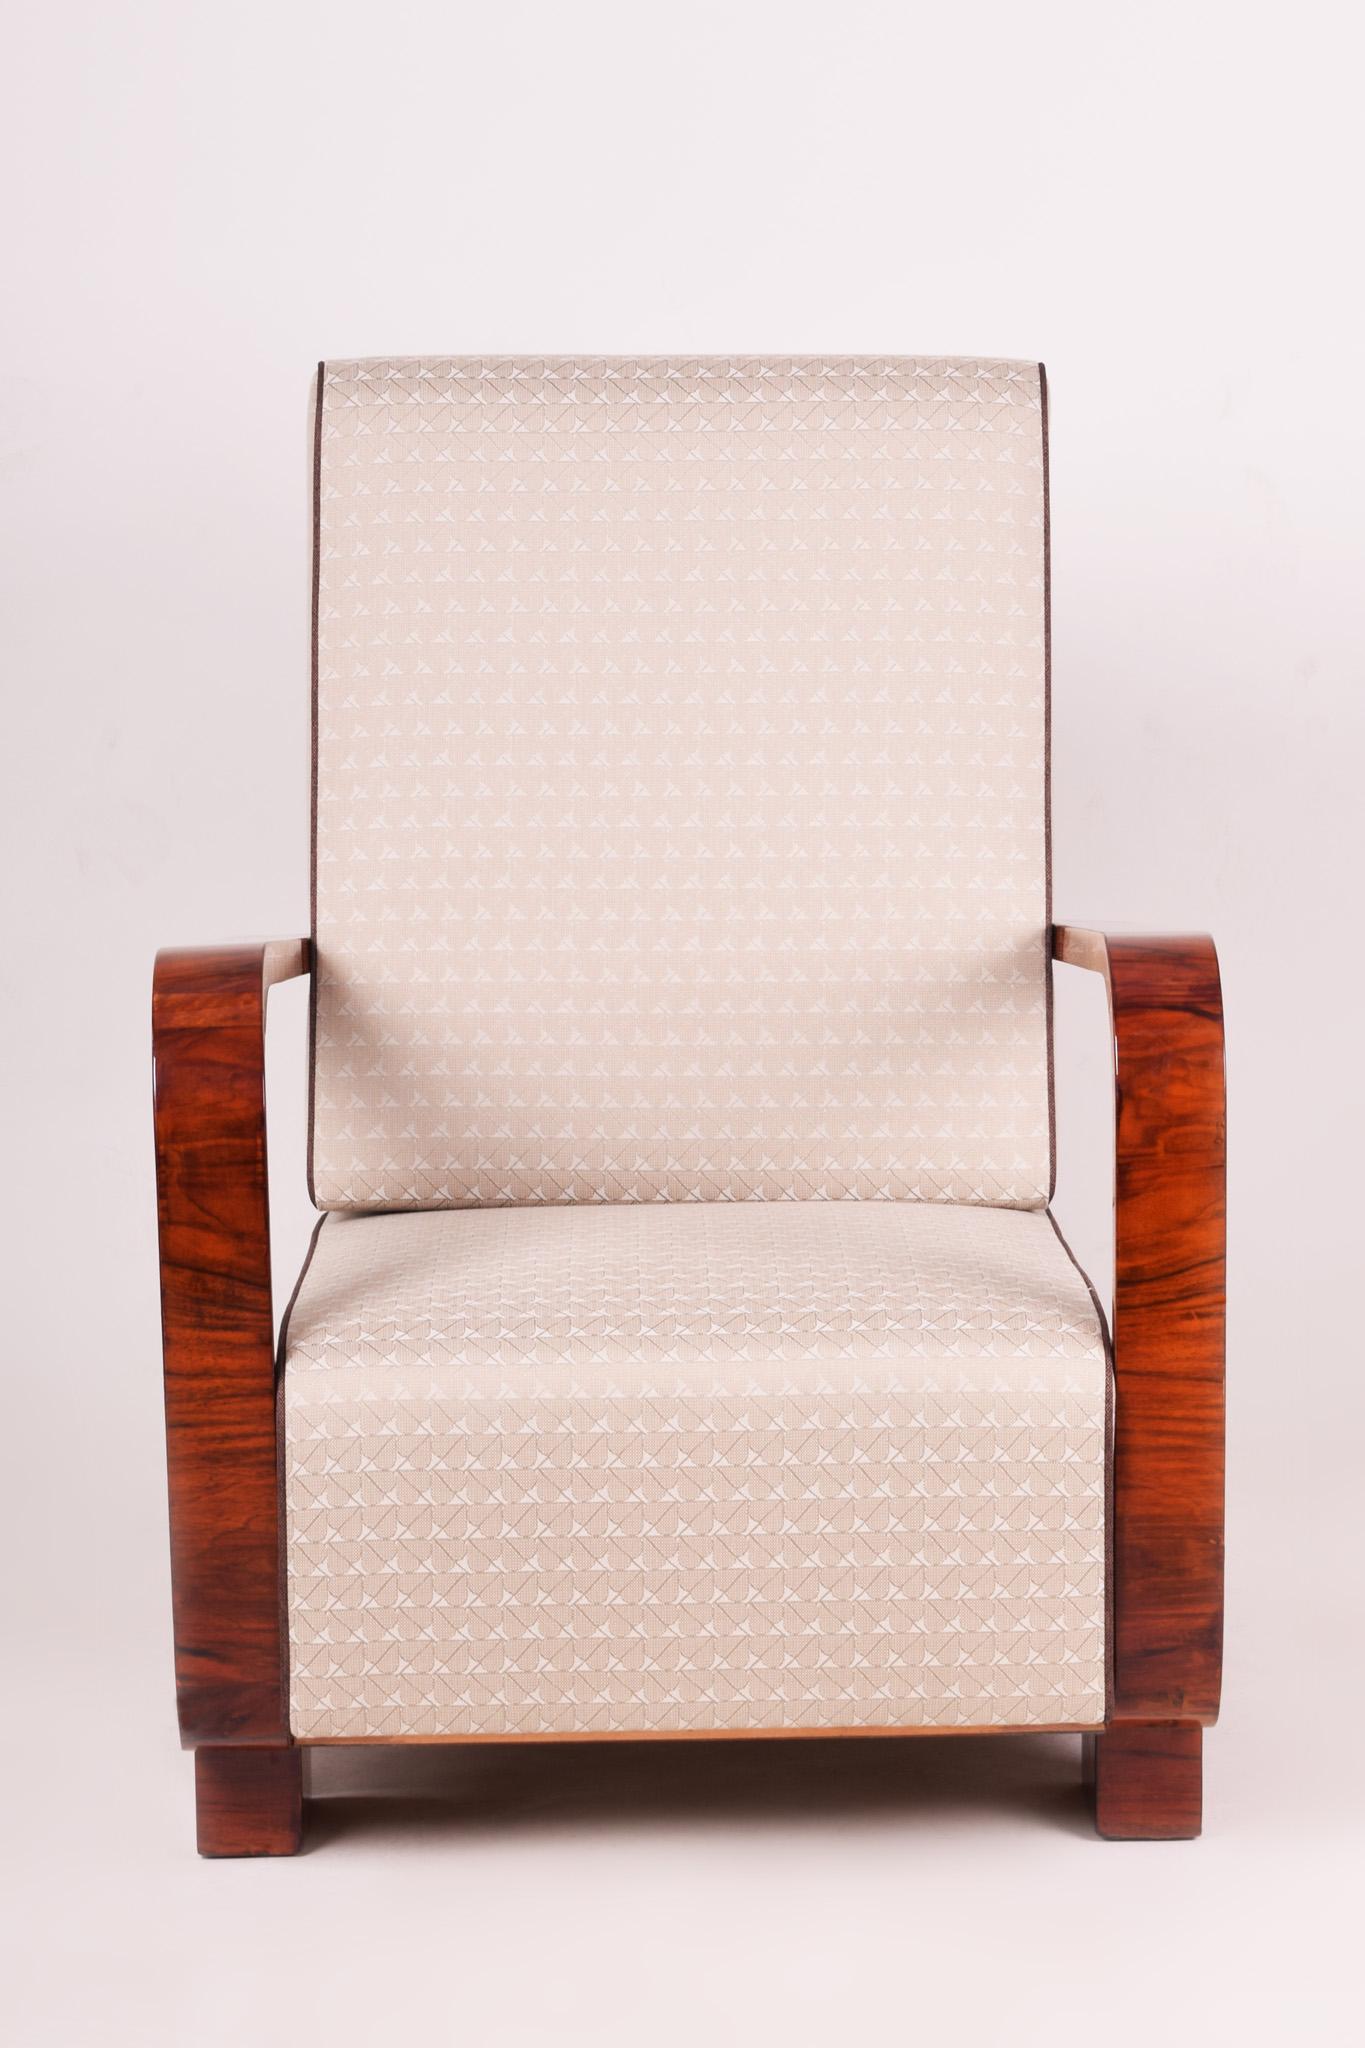 White Art Deco Armchair from Czechia, 1920s, Walnut, Restored Upholstery In Good Condition For Sale In Horomerice, CZ